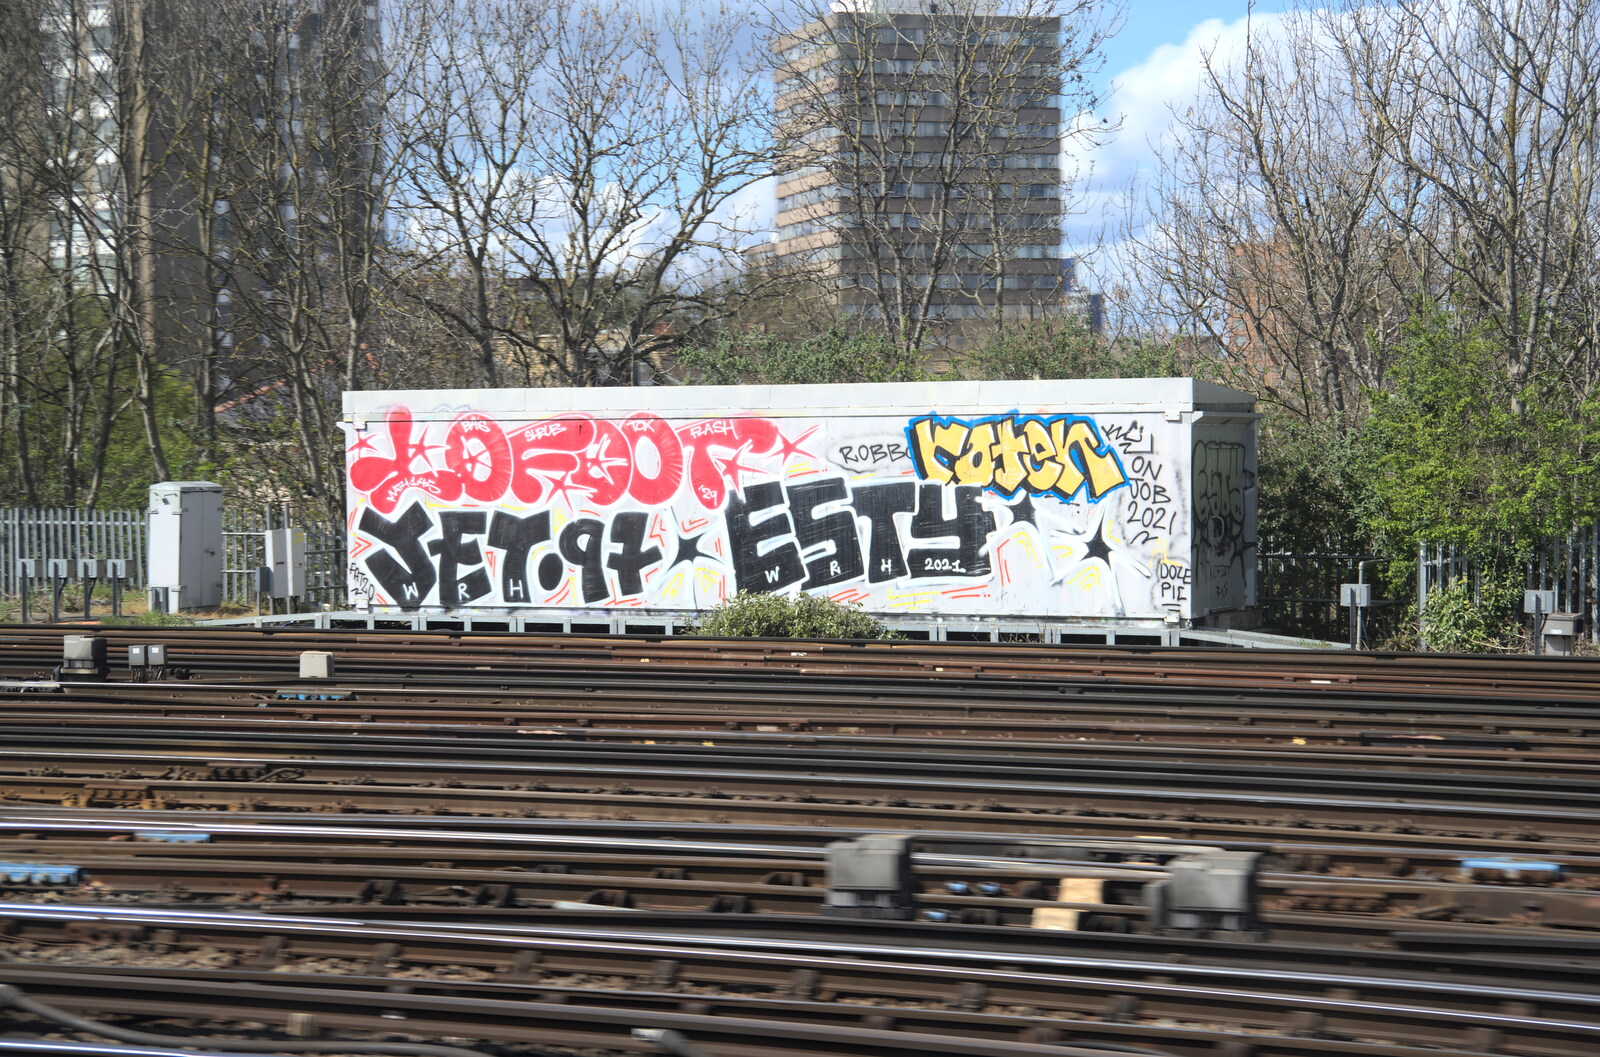 A Trip Down South, New Milton, Hampshire - 9th April 2022: More tags on trackside equipment